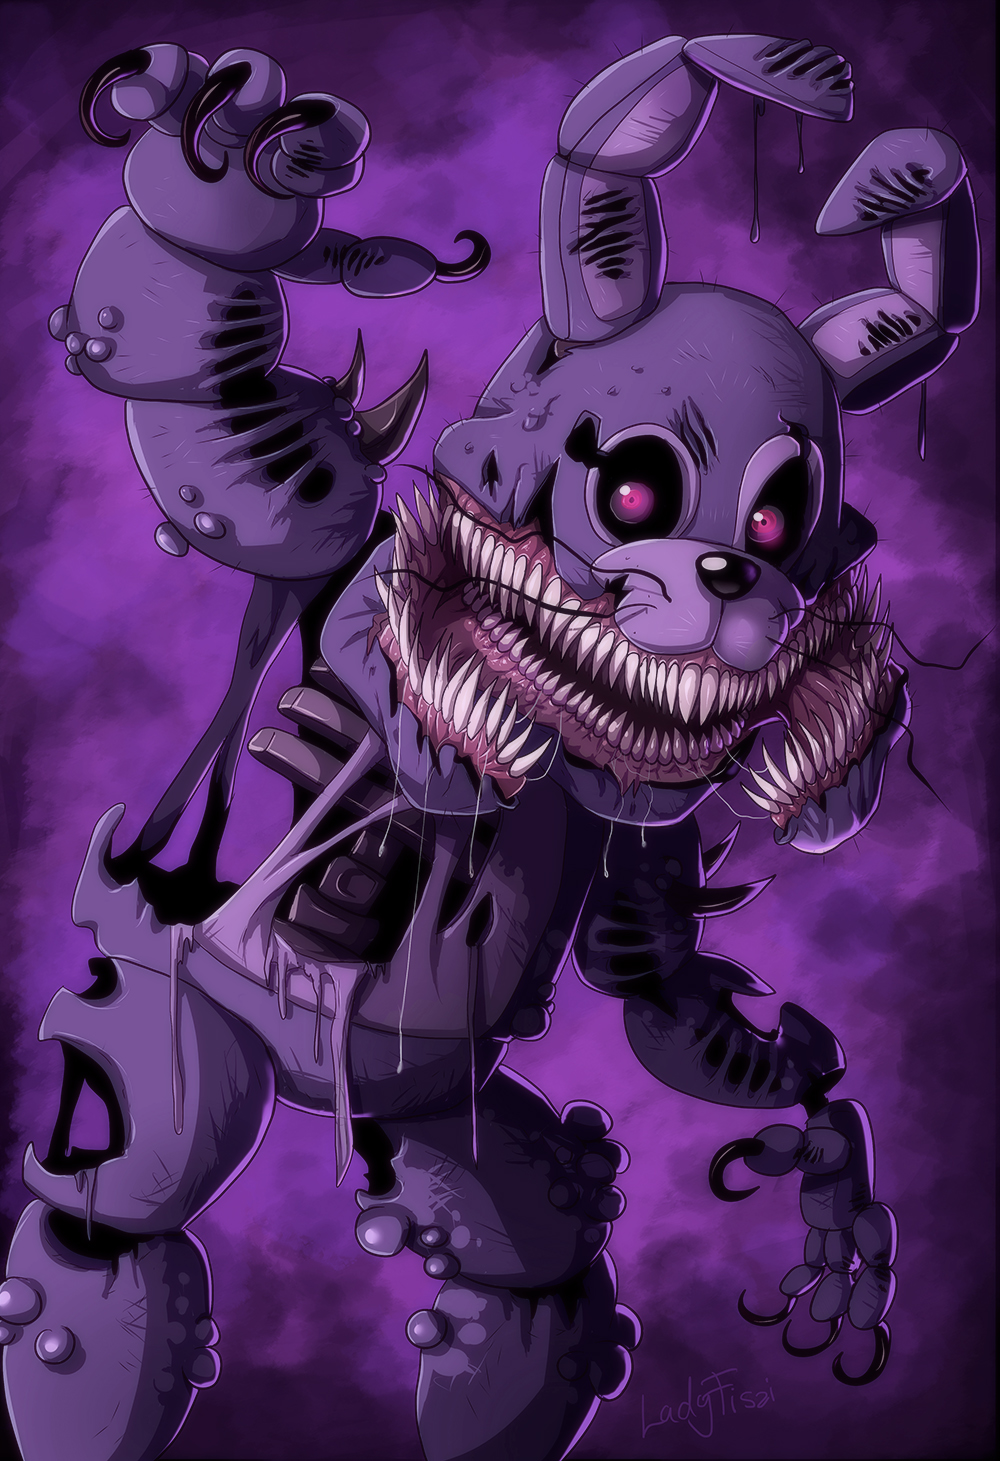 Five Nights at Freddy's: The Twisted Ones / Nightmare Fuel - TV Tropes